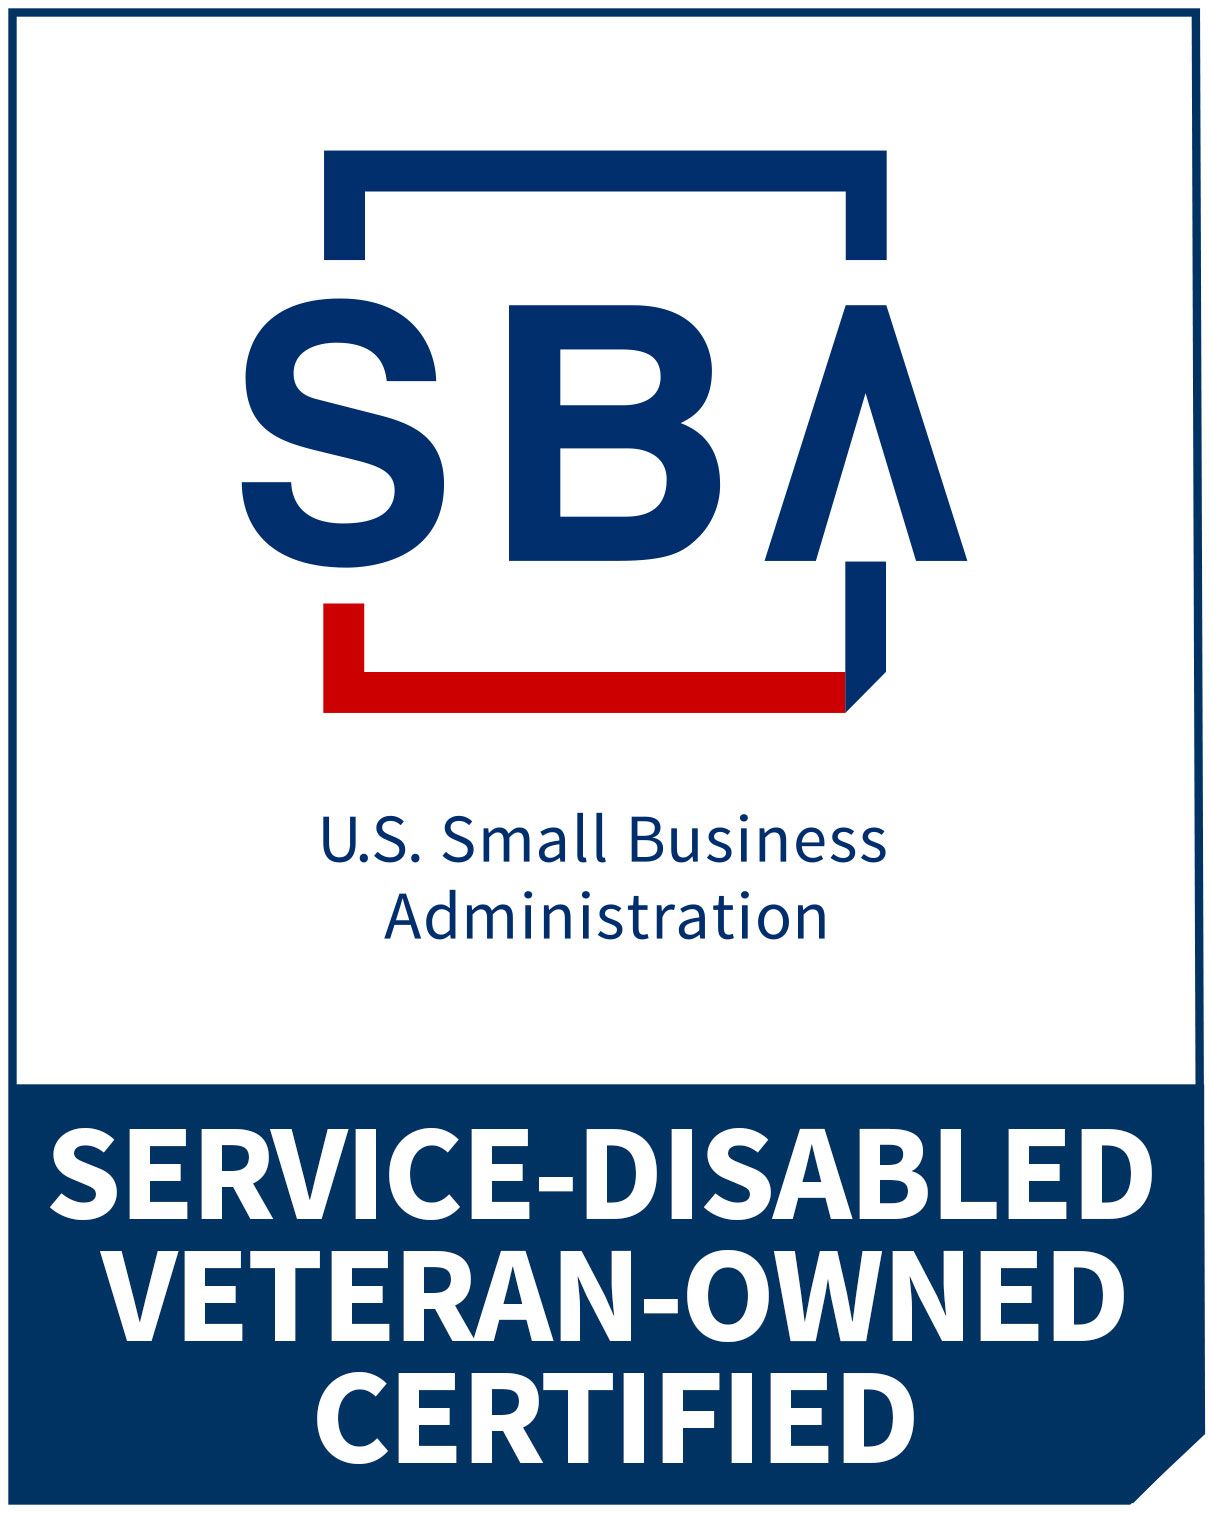 The Logo for U.S. Small Business Administration Service